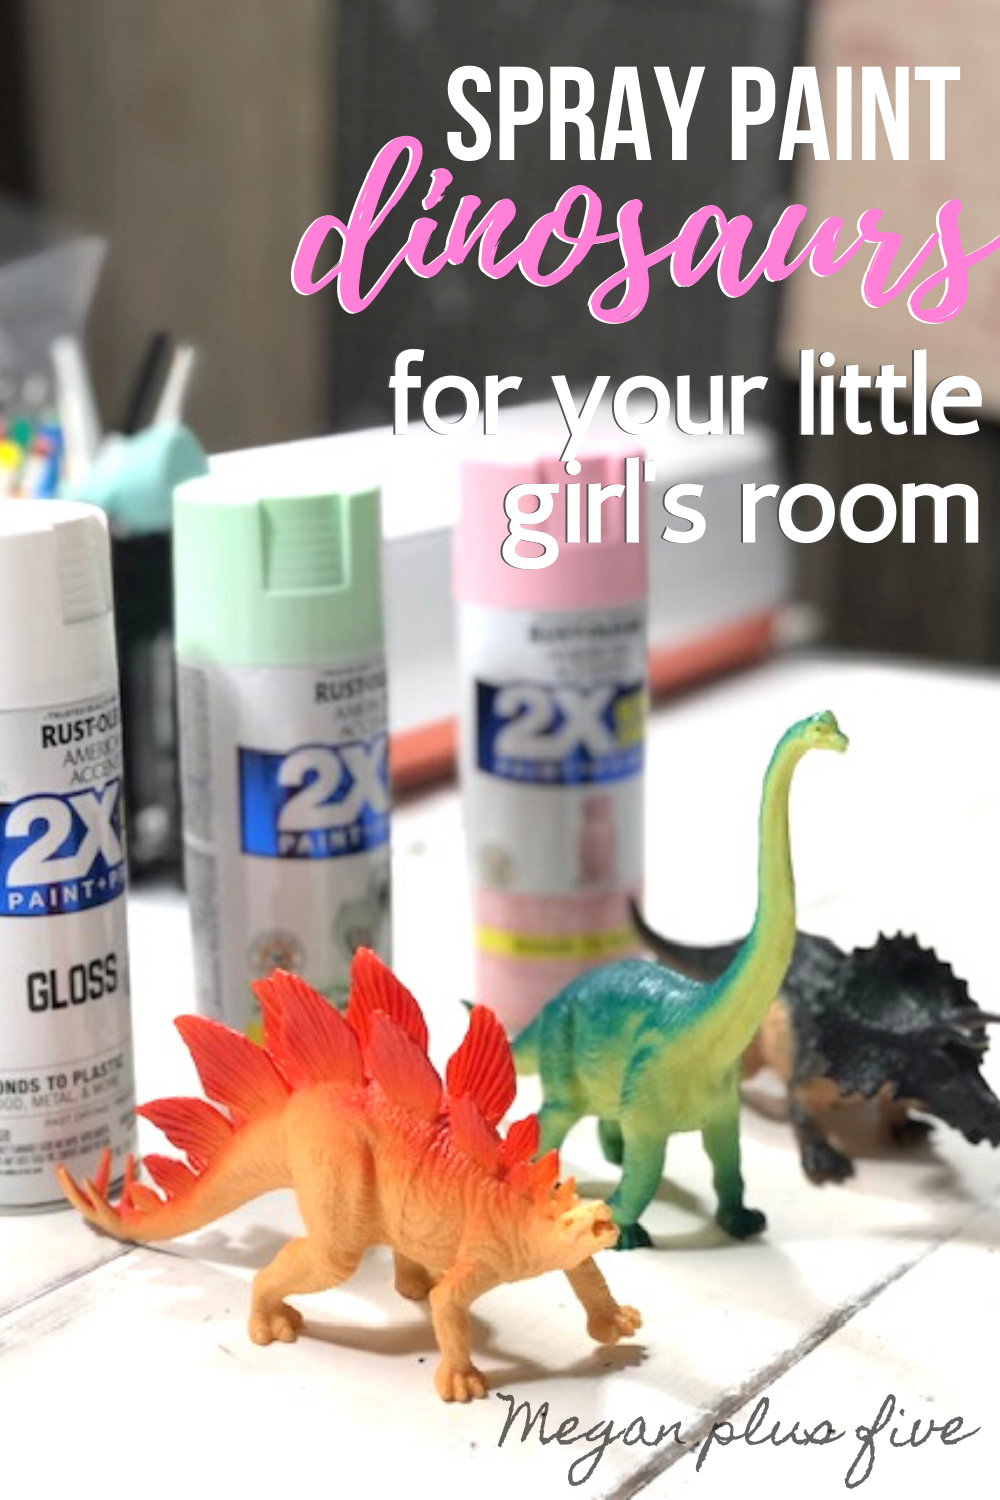 Make your little girl's dinosaur room dreams come true. How to spray paint cheap plastic dinosaurs to make them girly. DIY girl themed dinosaur bedroom for your daughter.